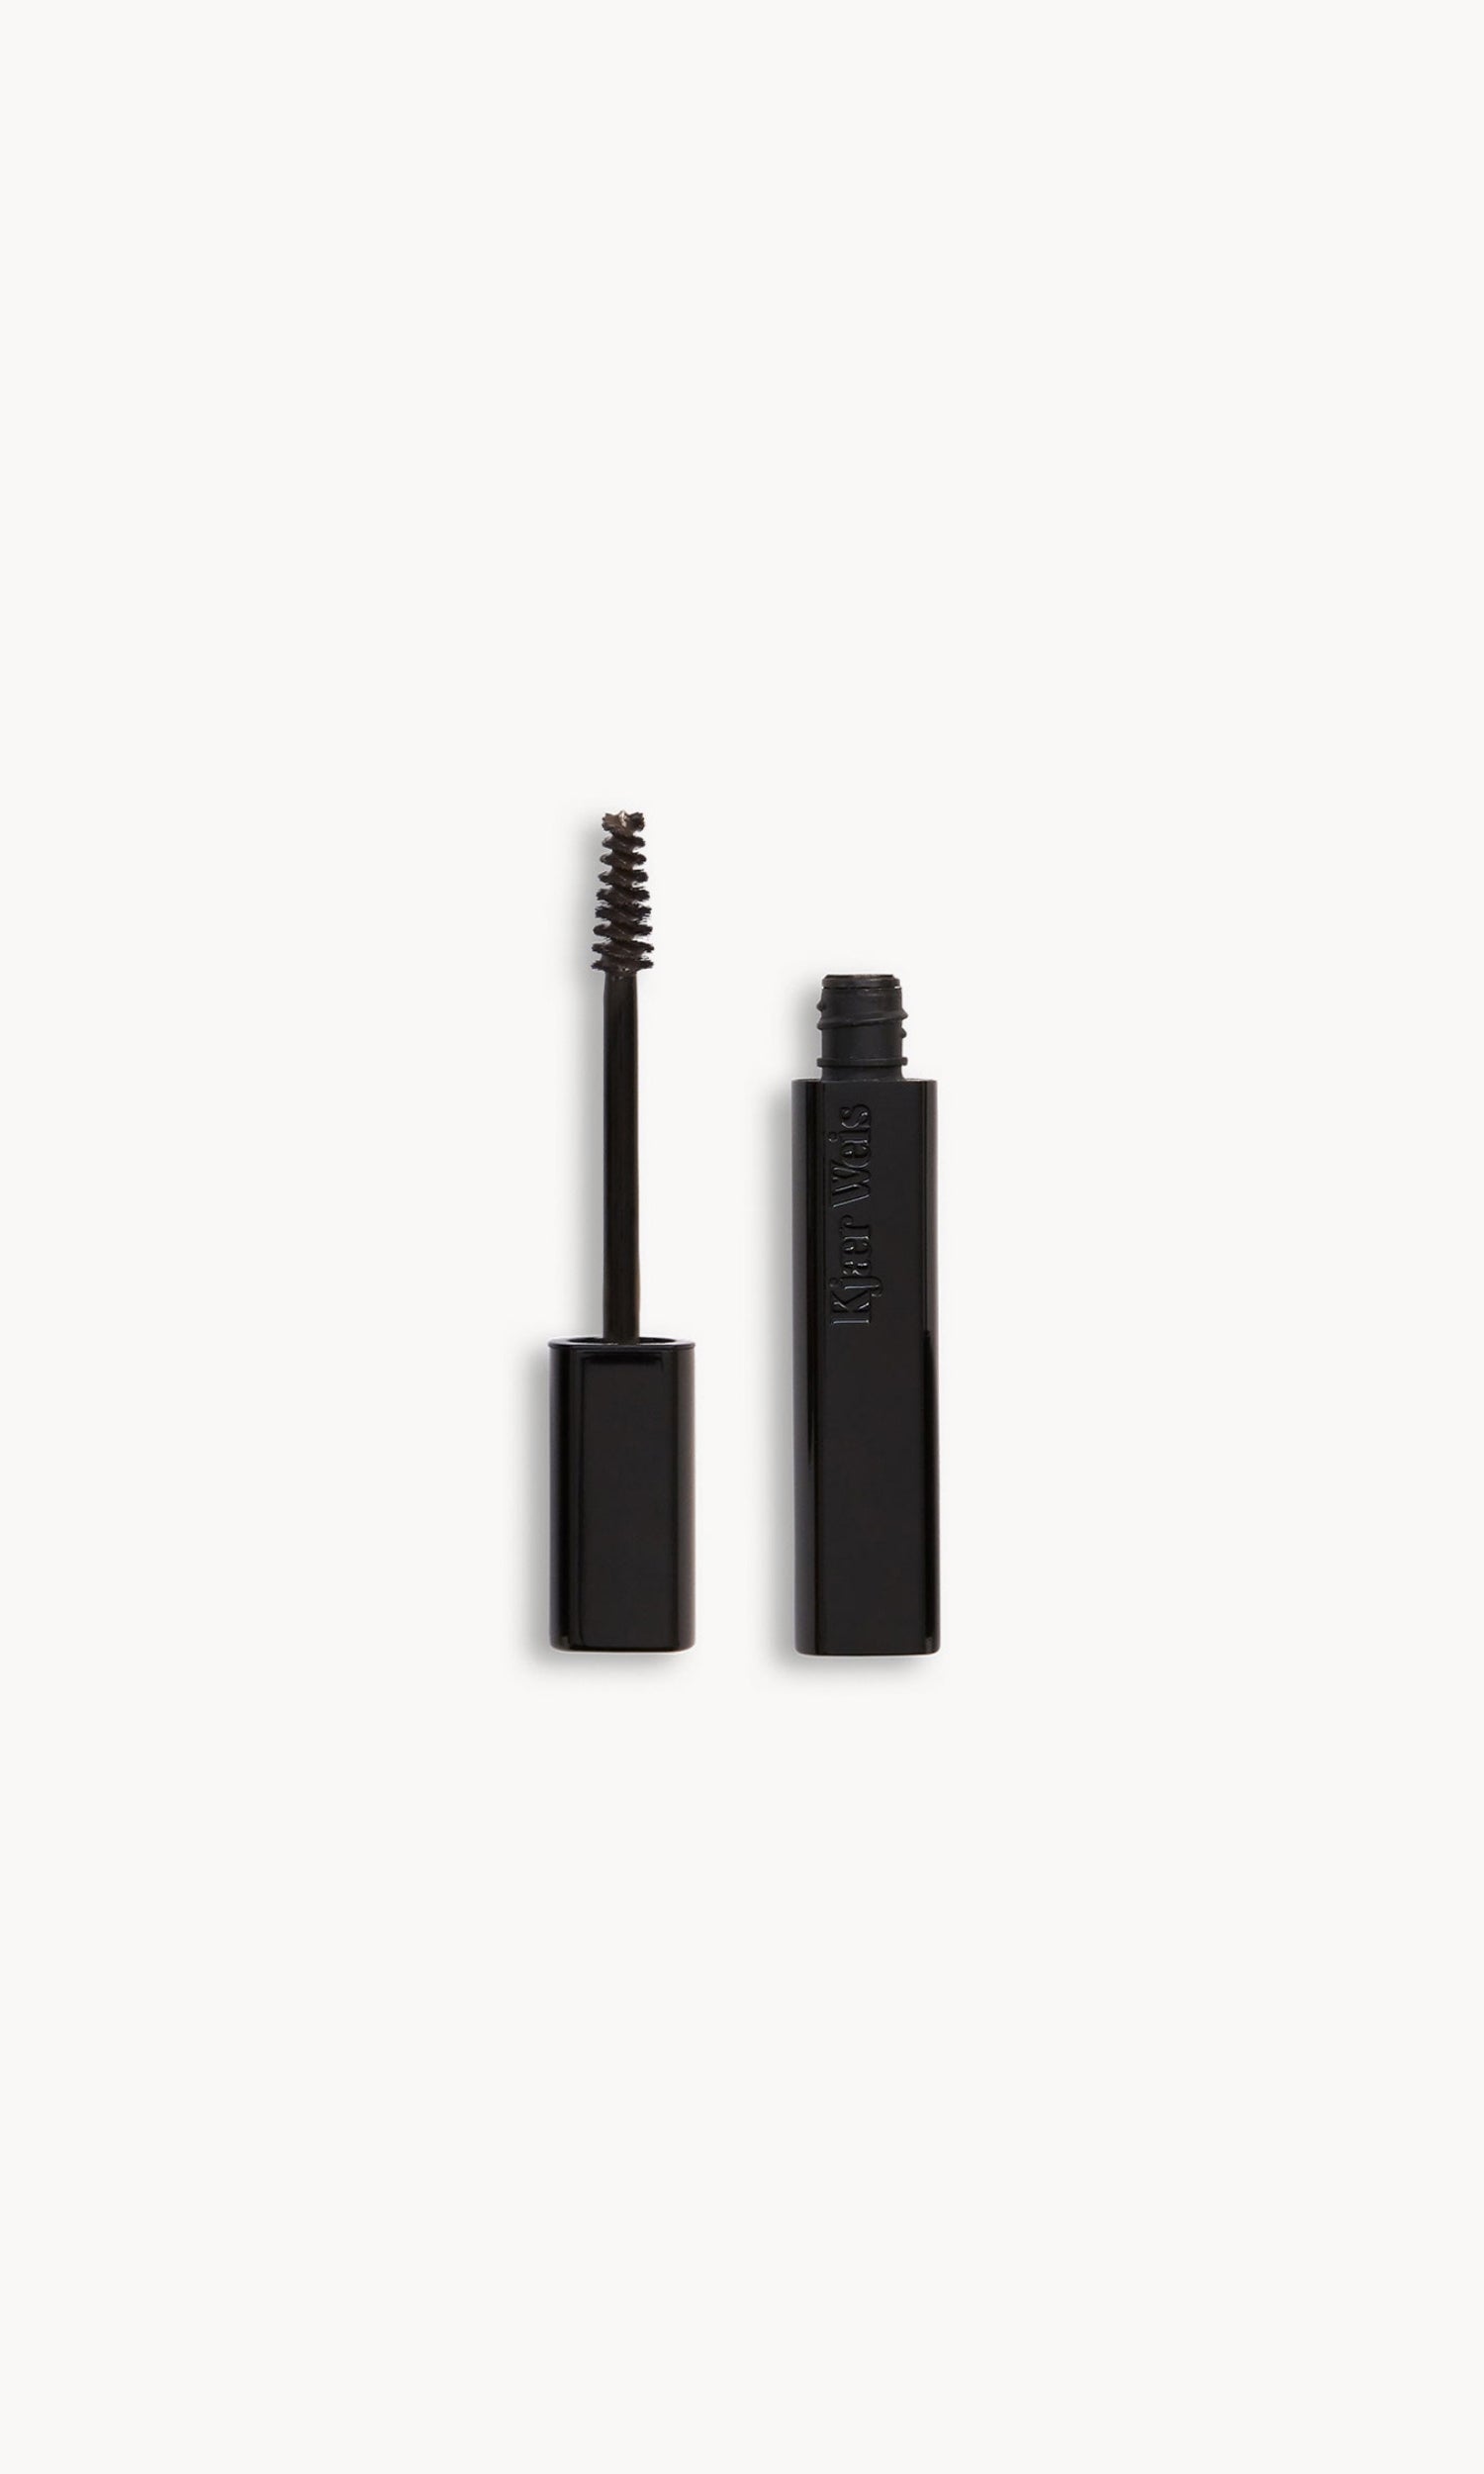 Black Kjaer Weis brow gel wand and bottle side by side, with dark brown product on the wand